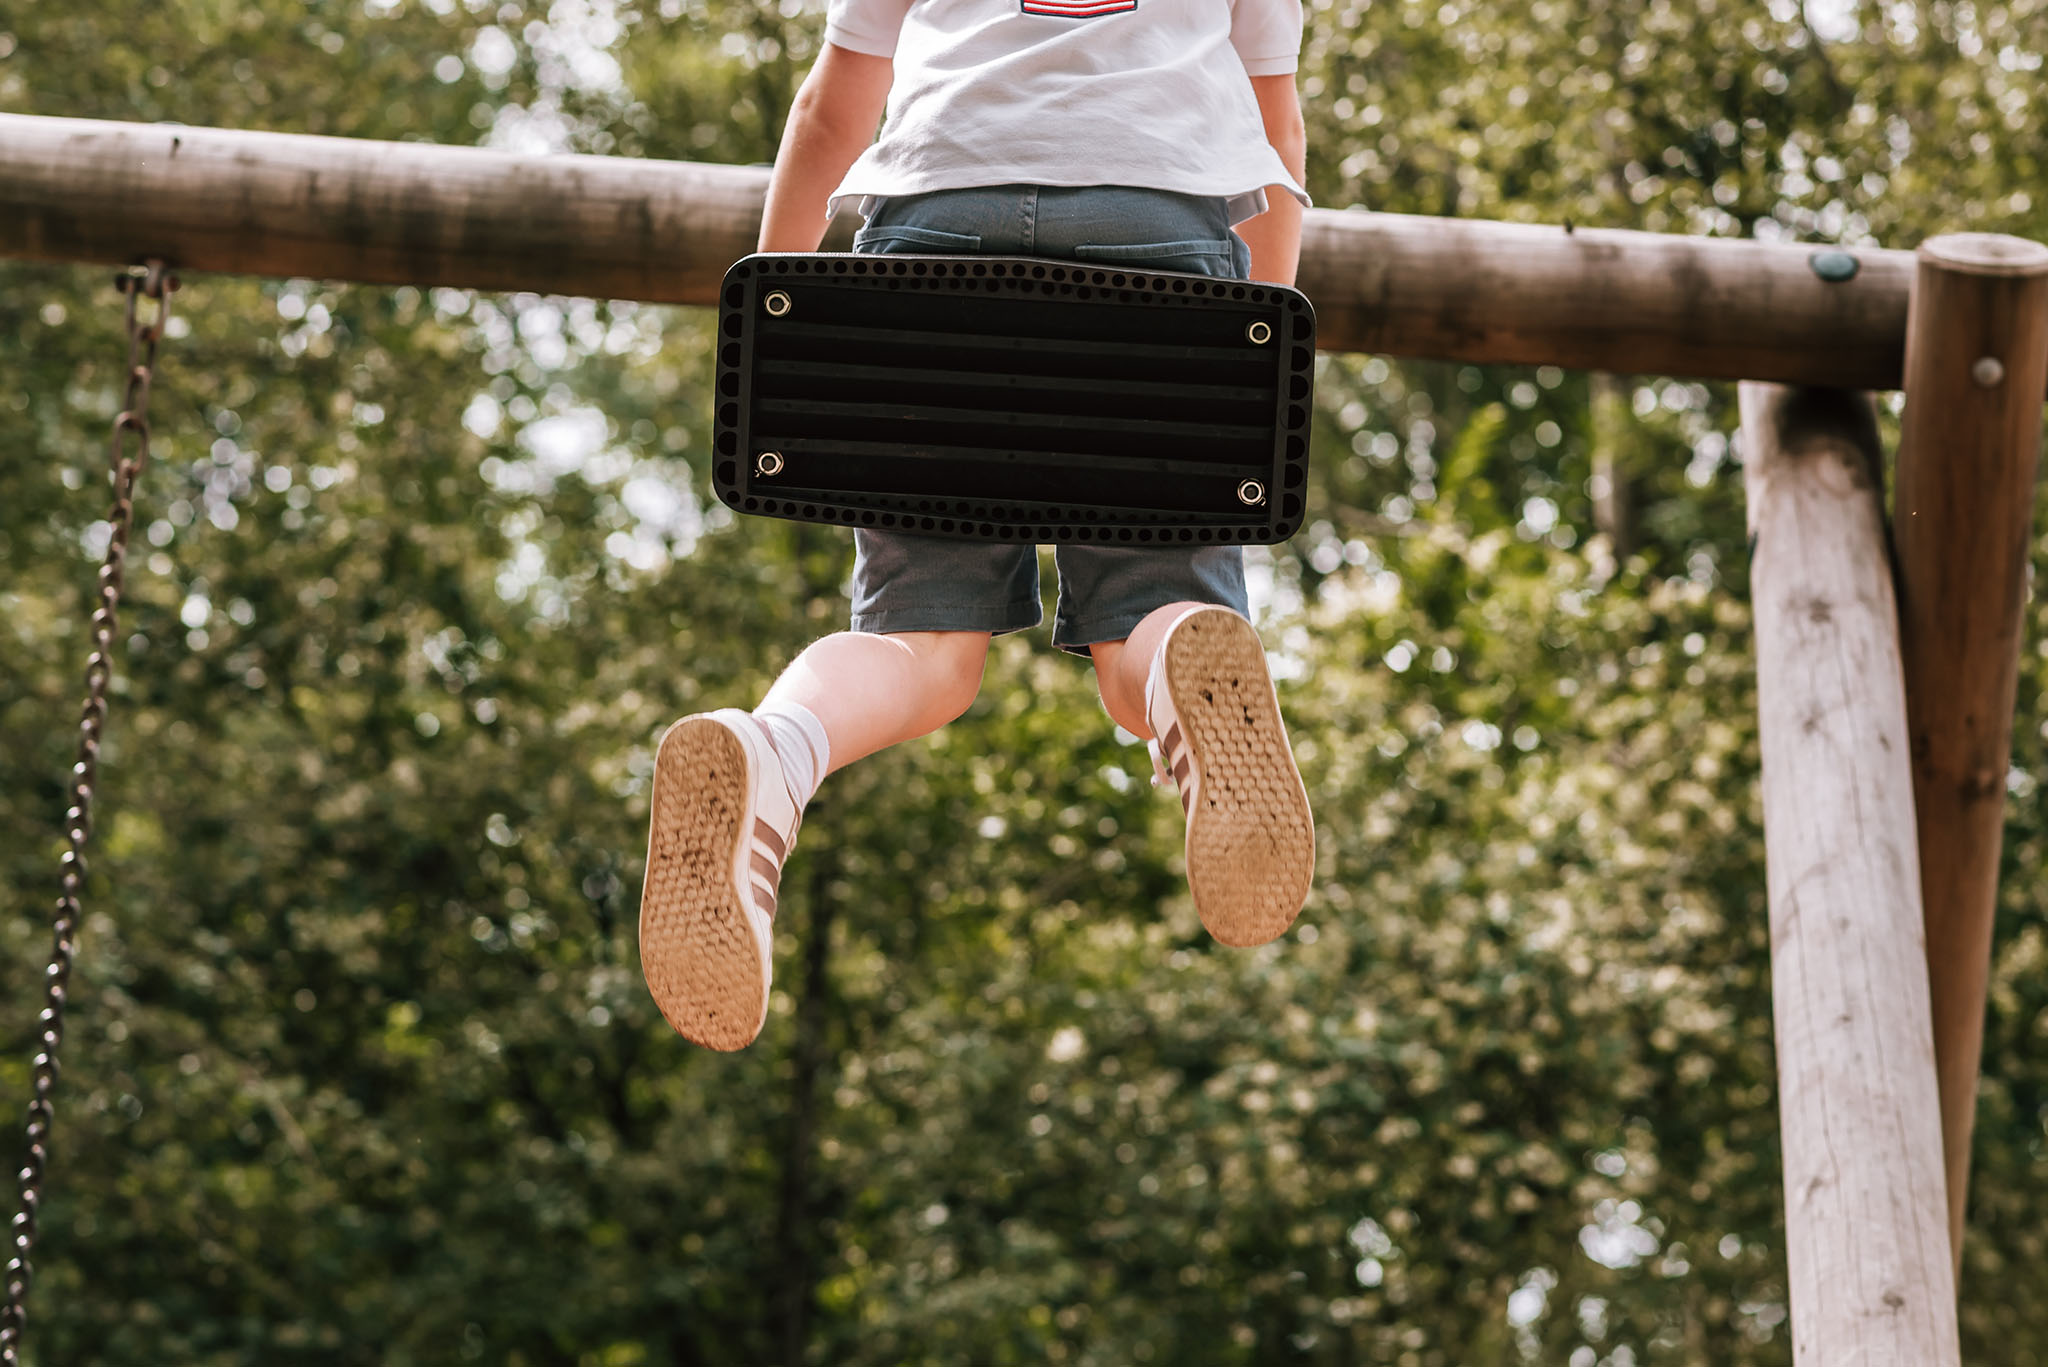 Why Back Button Focus (BBF) is my BFF - Child on swing from below